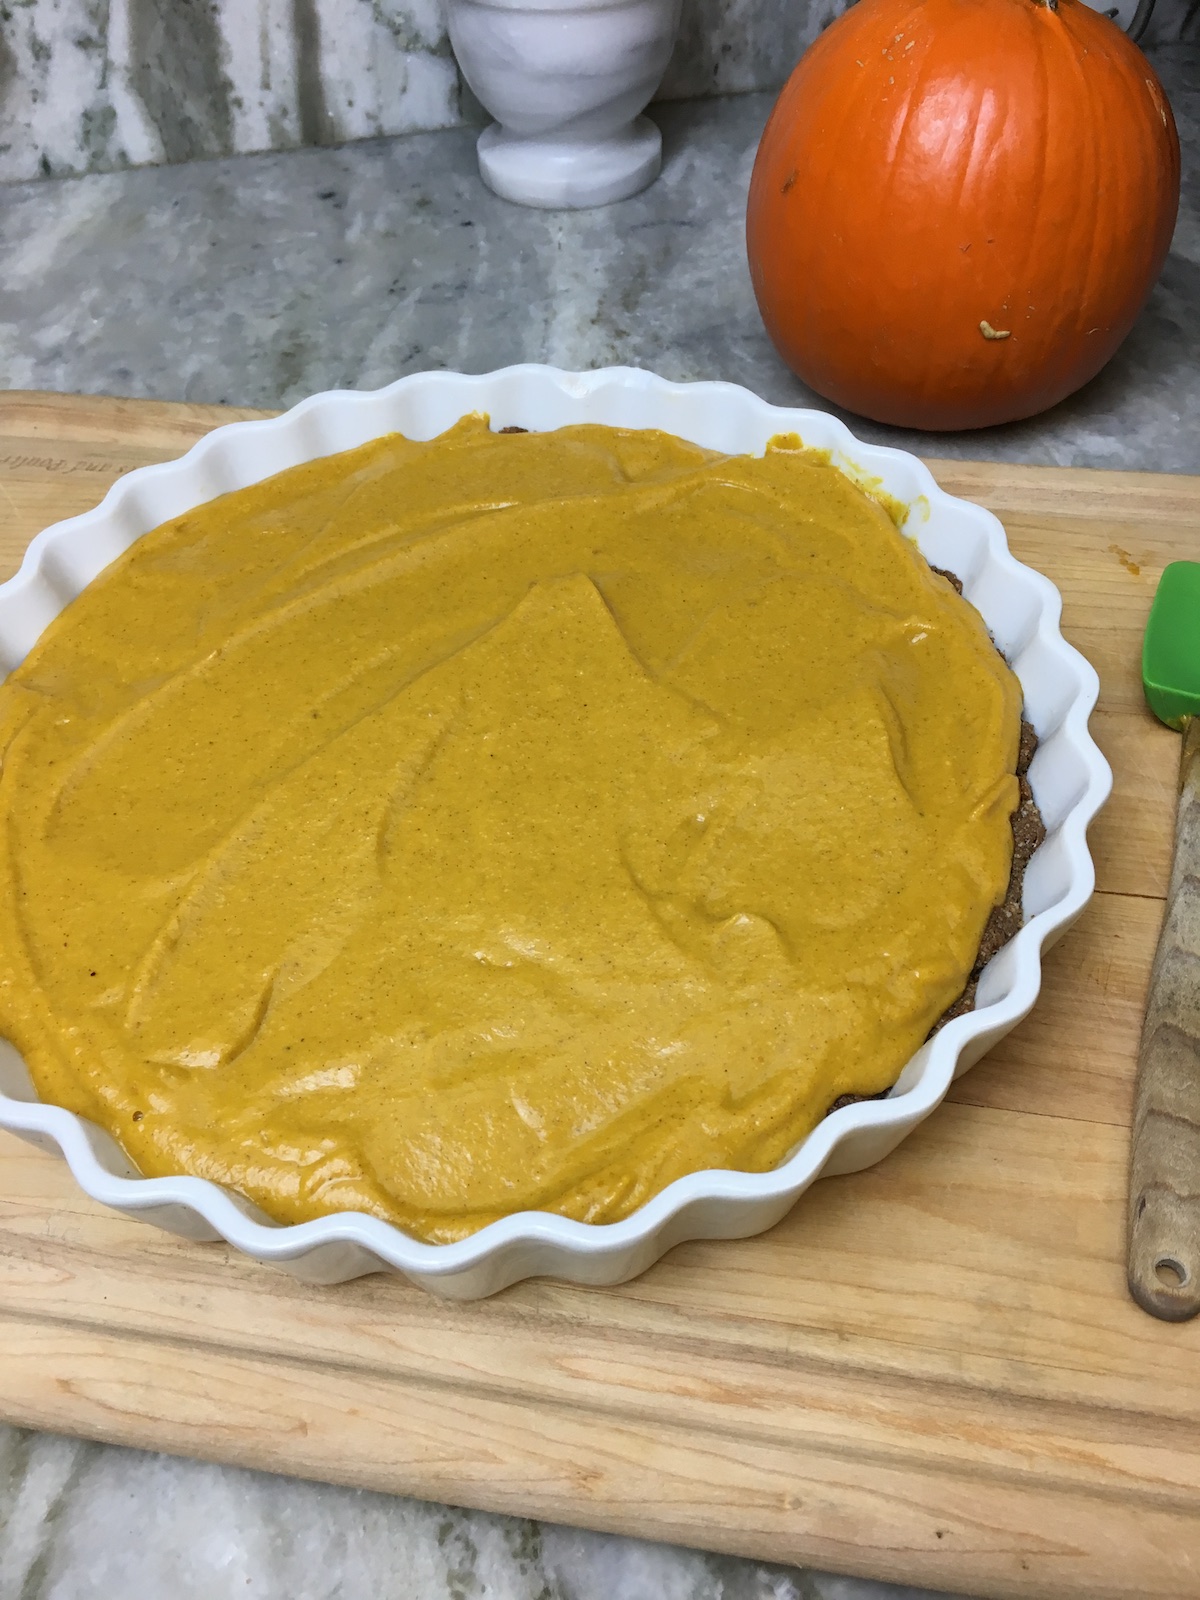 After the crust has baked for 10 mins, smooth pumpkin filling on top.